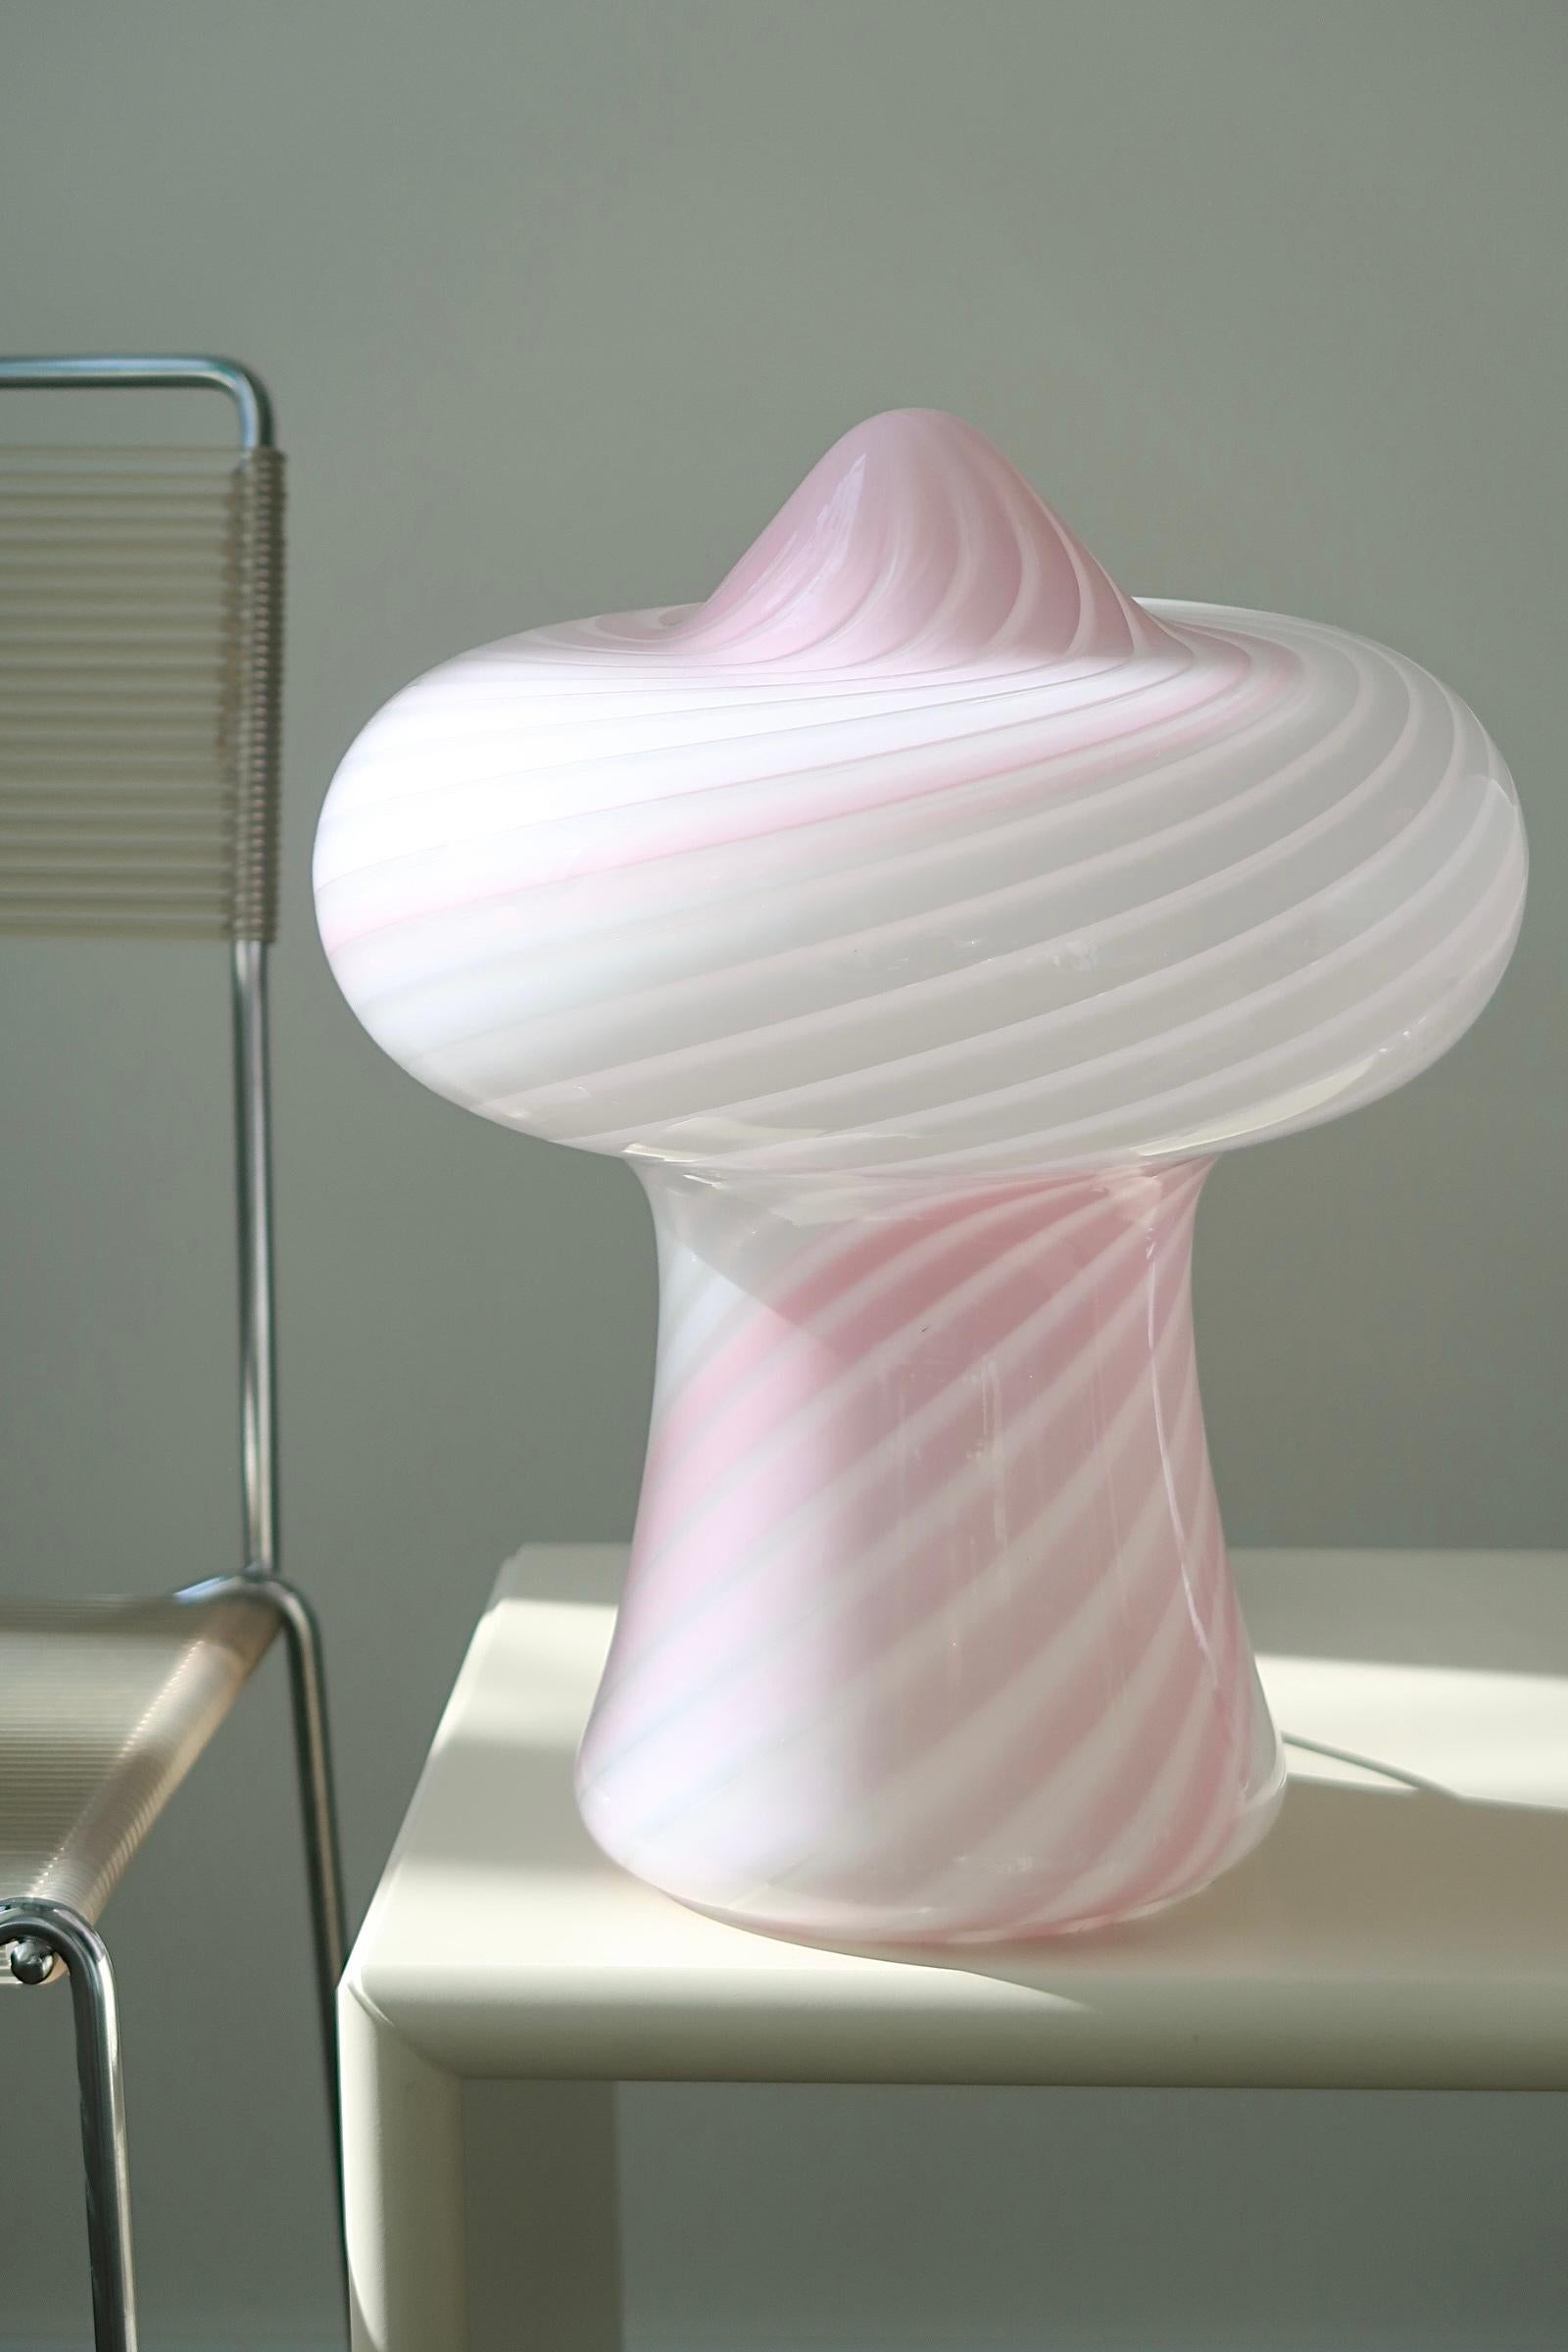 Only 1 left! Beautiful Murano mushroom lamp in large size. Mouth-blown in white and pink glass with a swirl pattern. Handmade in Italy, 1970s, has original Murano Vetri label and comes with new white cord. ?H: 38 cm D: 30 cm?.